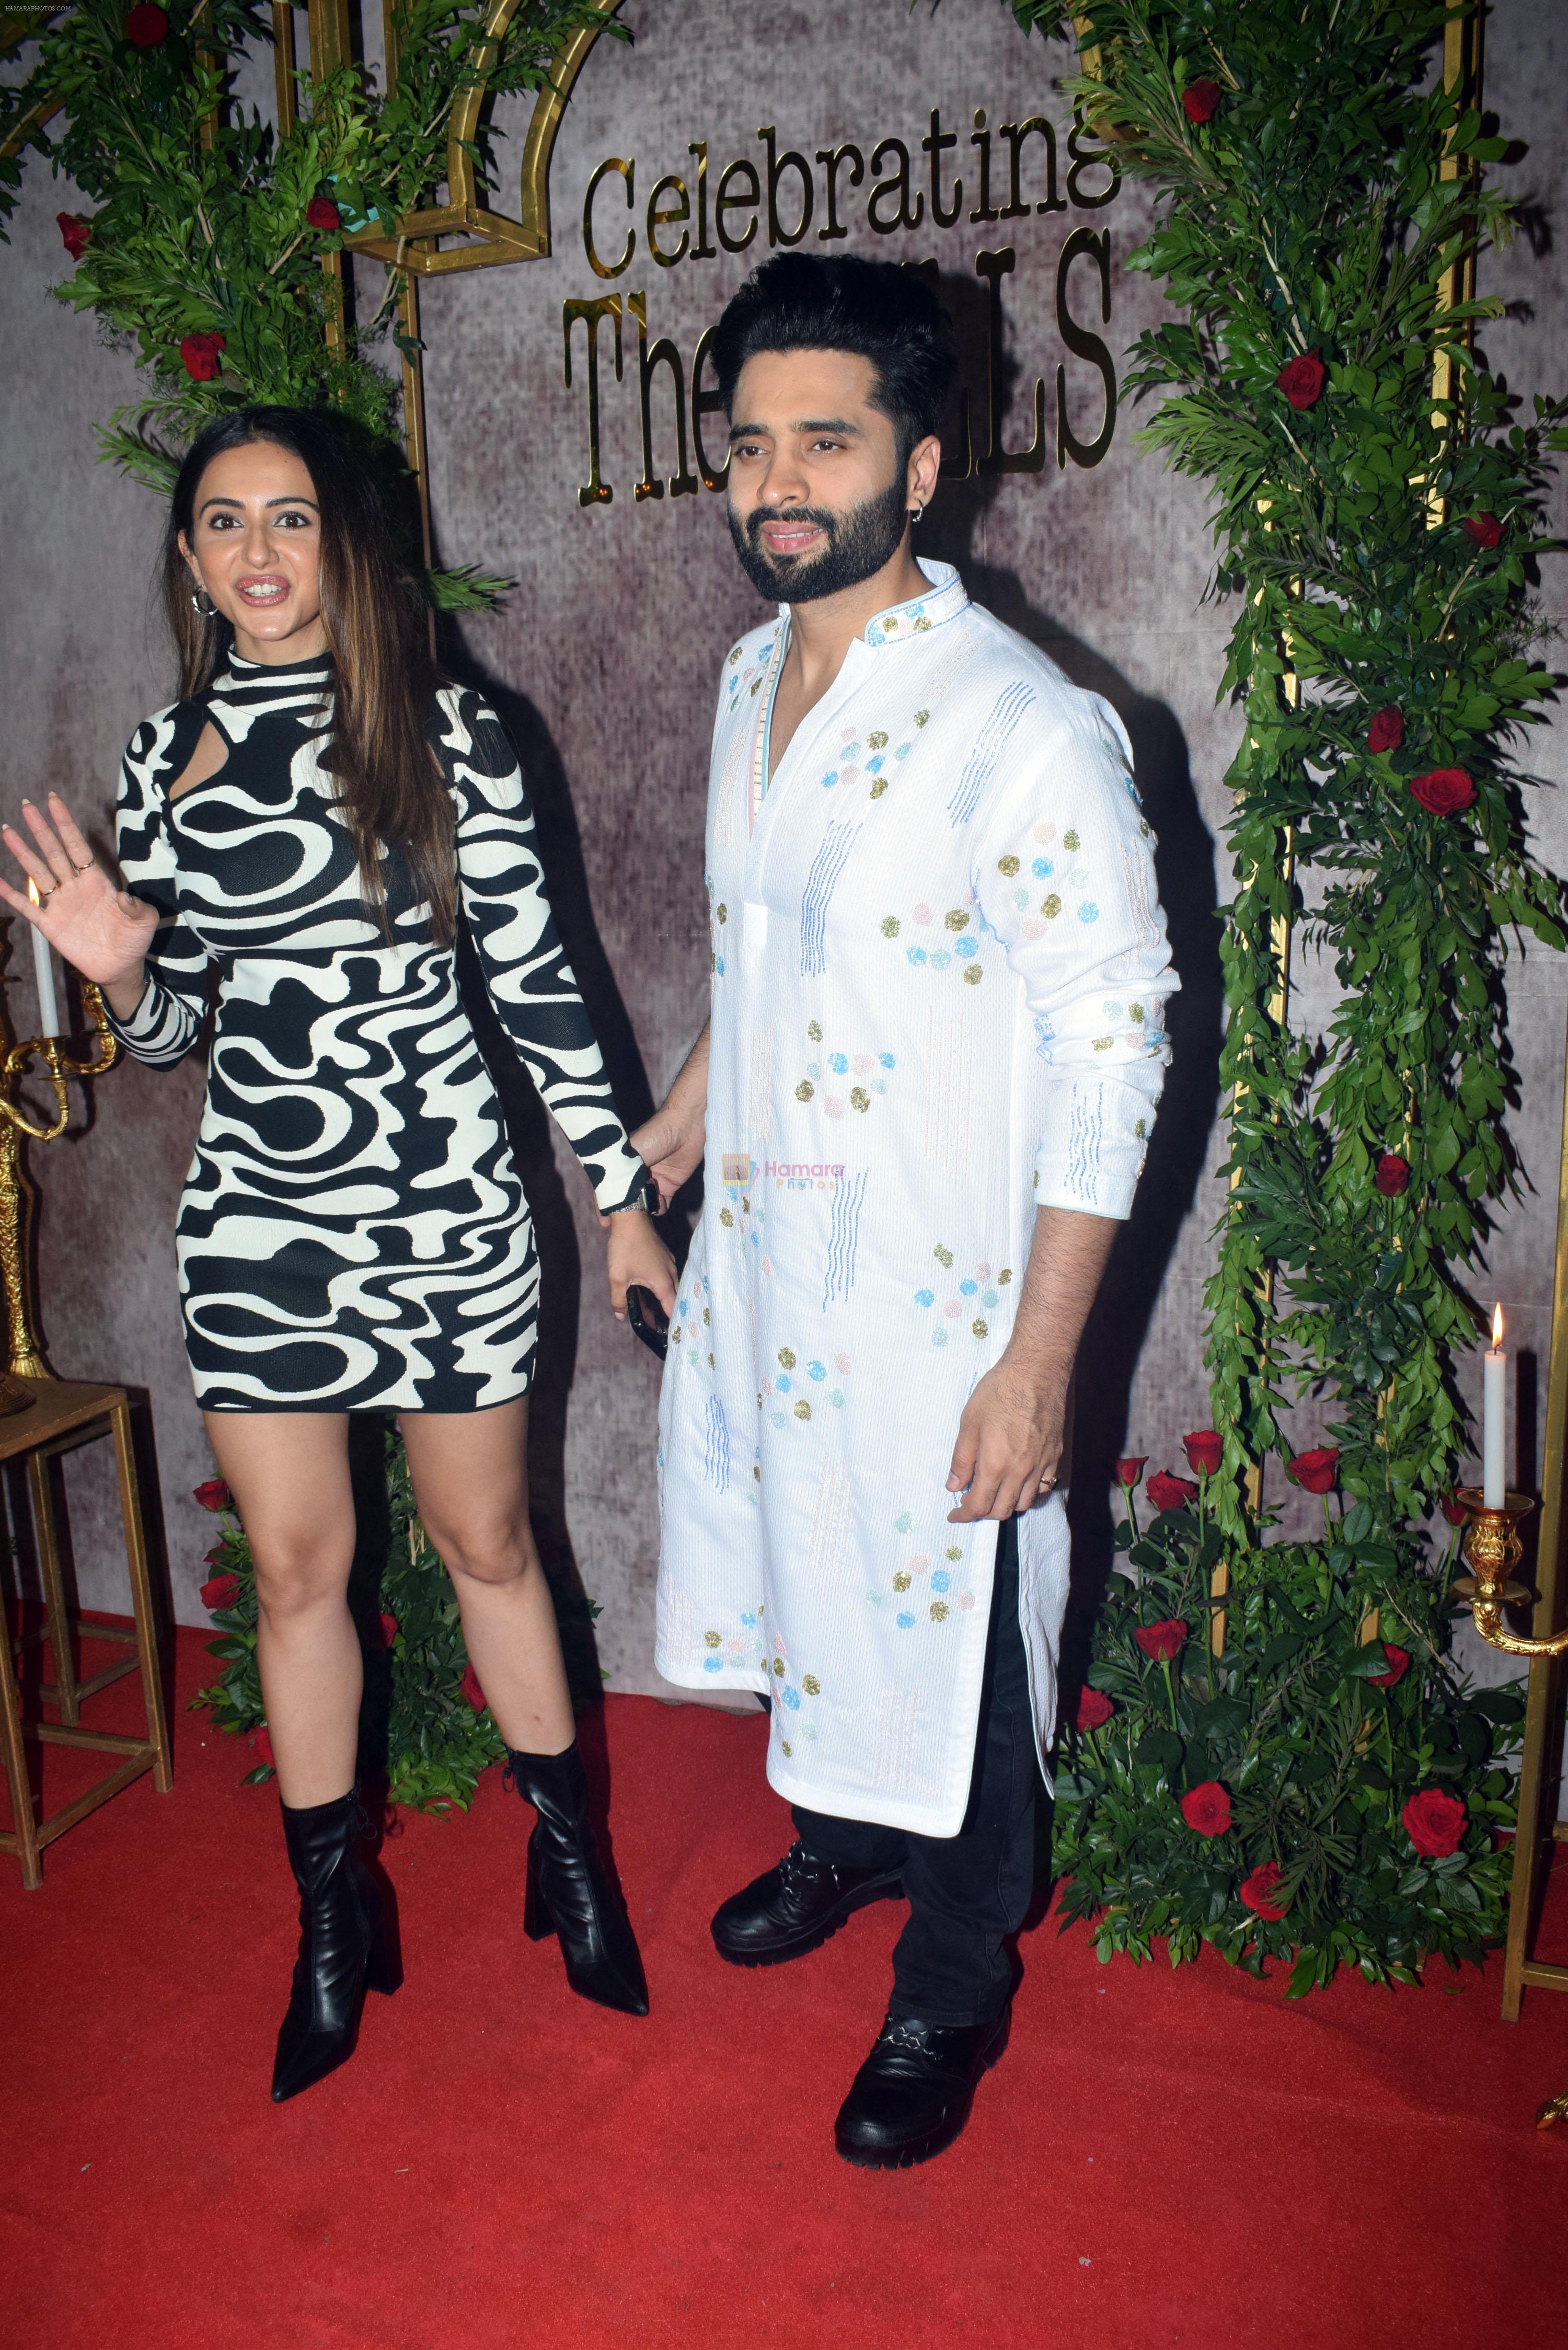 Jackky Bhagnani, Rakul Preet Singh attends the wedding party of Aman Gill and Amrit Berar on 24th Sept 2023